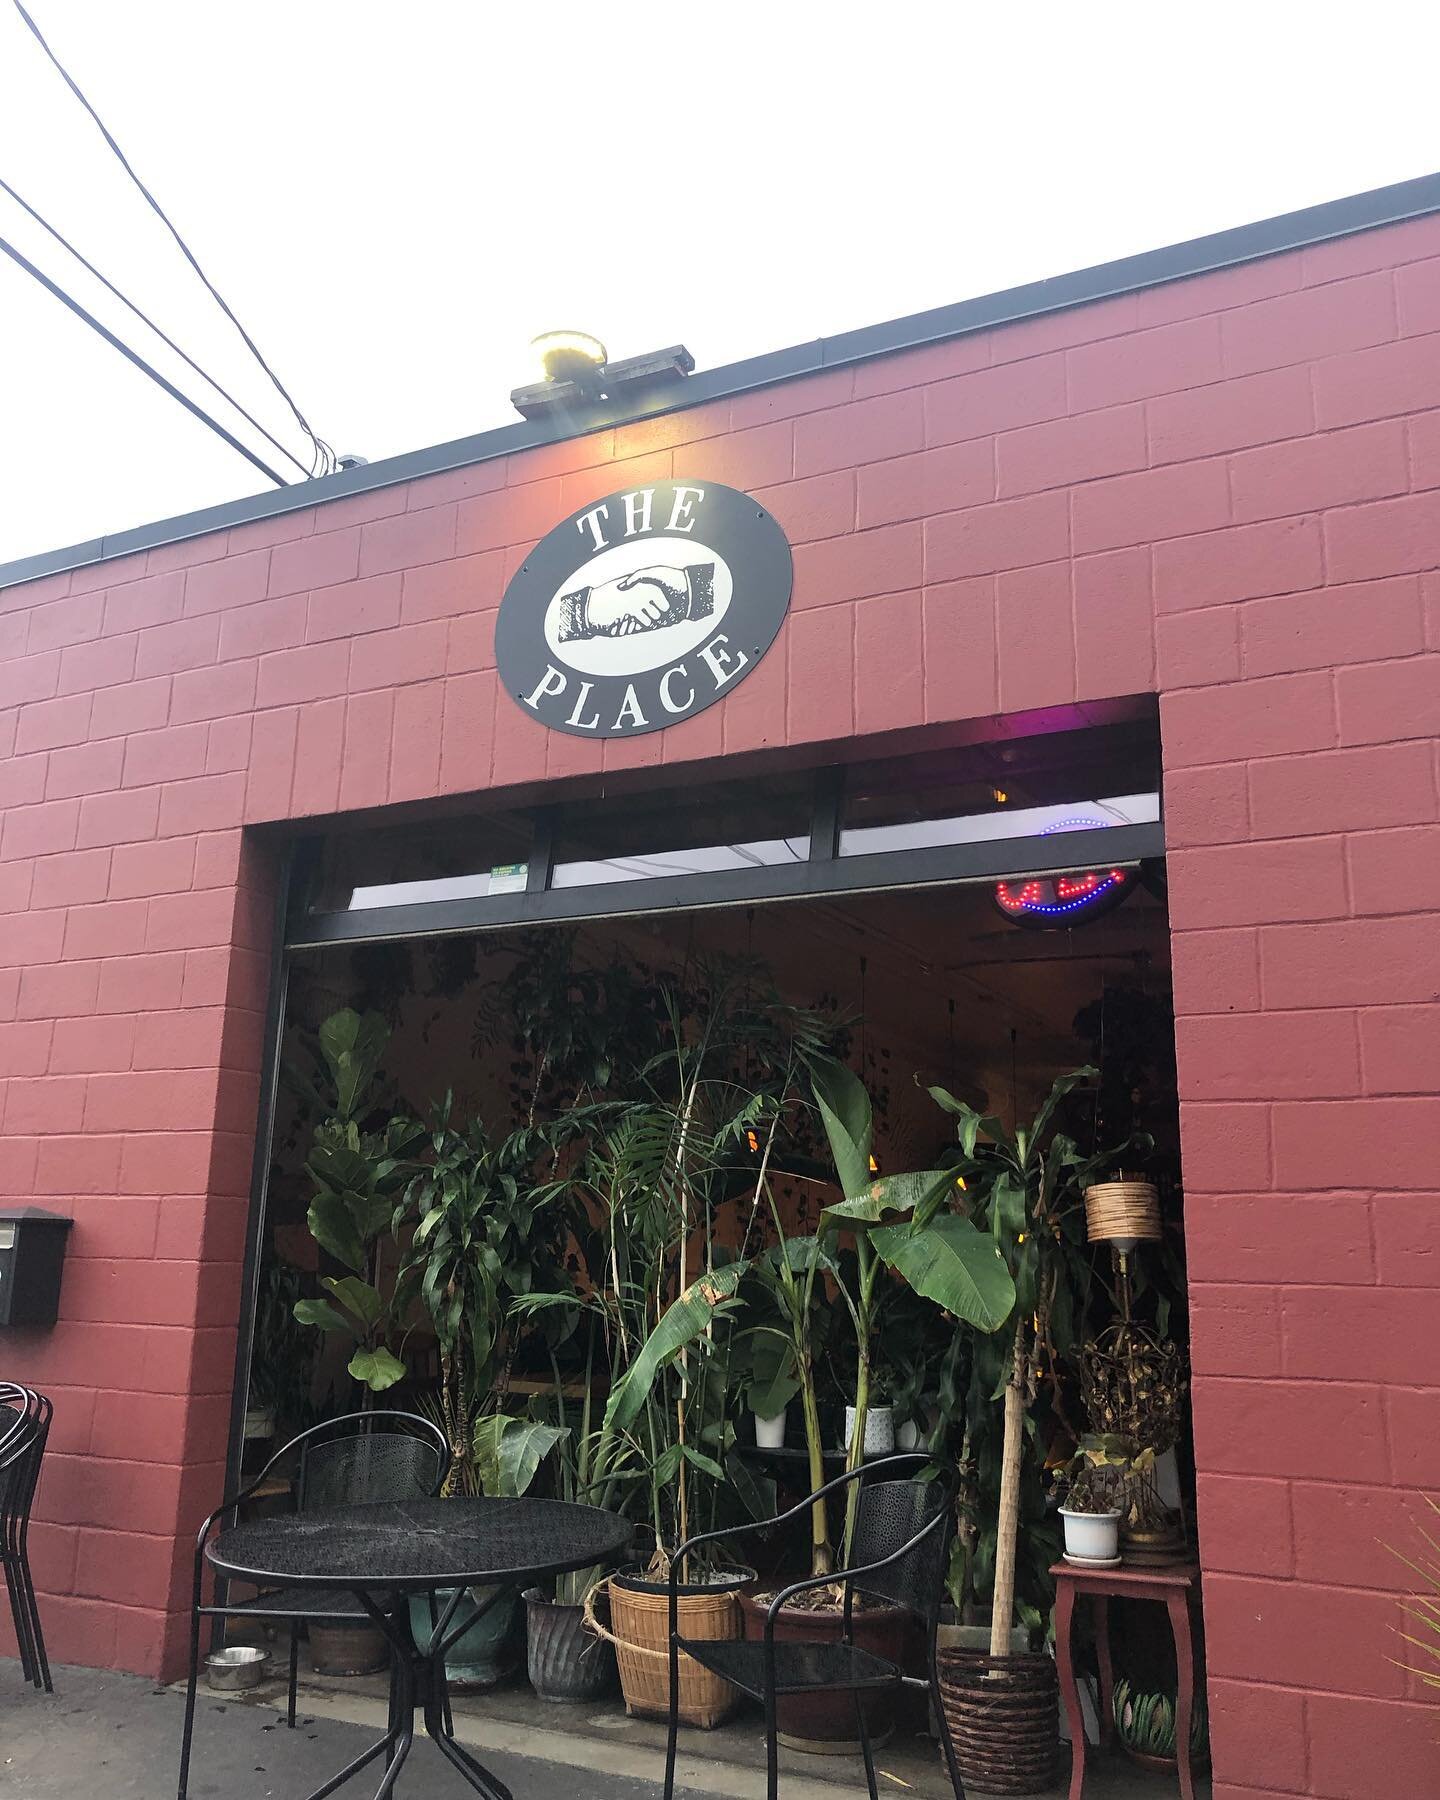 @the_place_pdx 
The Place. One of the coolest spots in the world to drink real cider, with others who love real cider. Bonus: you can buy Idol Cider House cider there too!

#theplacepdx #ciderfood #シードル #cideriswine #drycider #cider #apples #wine #ma